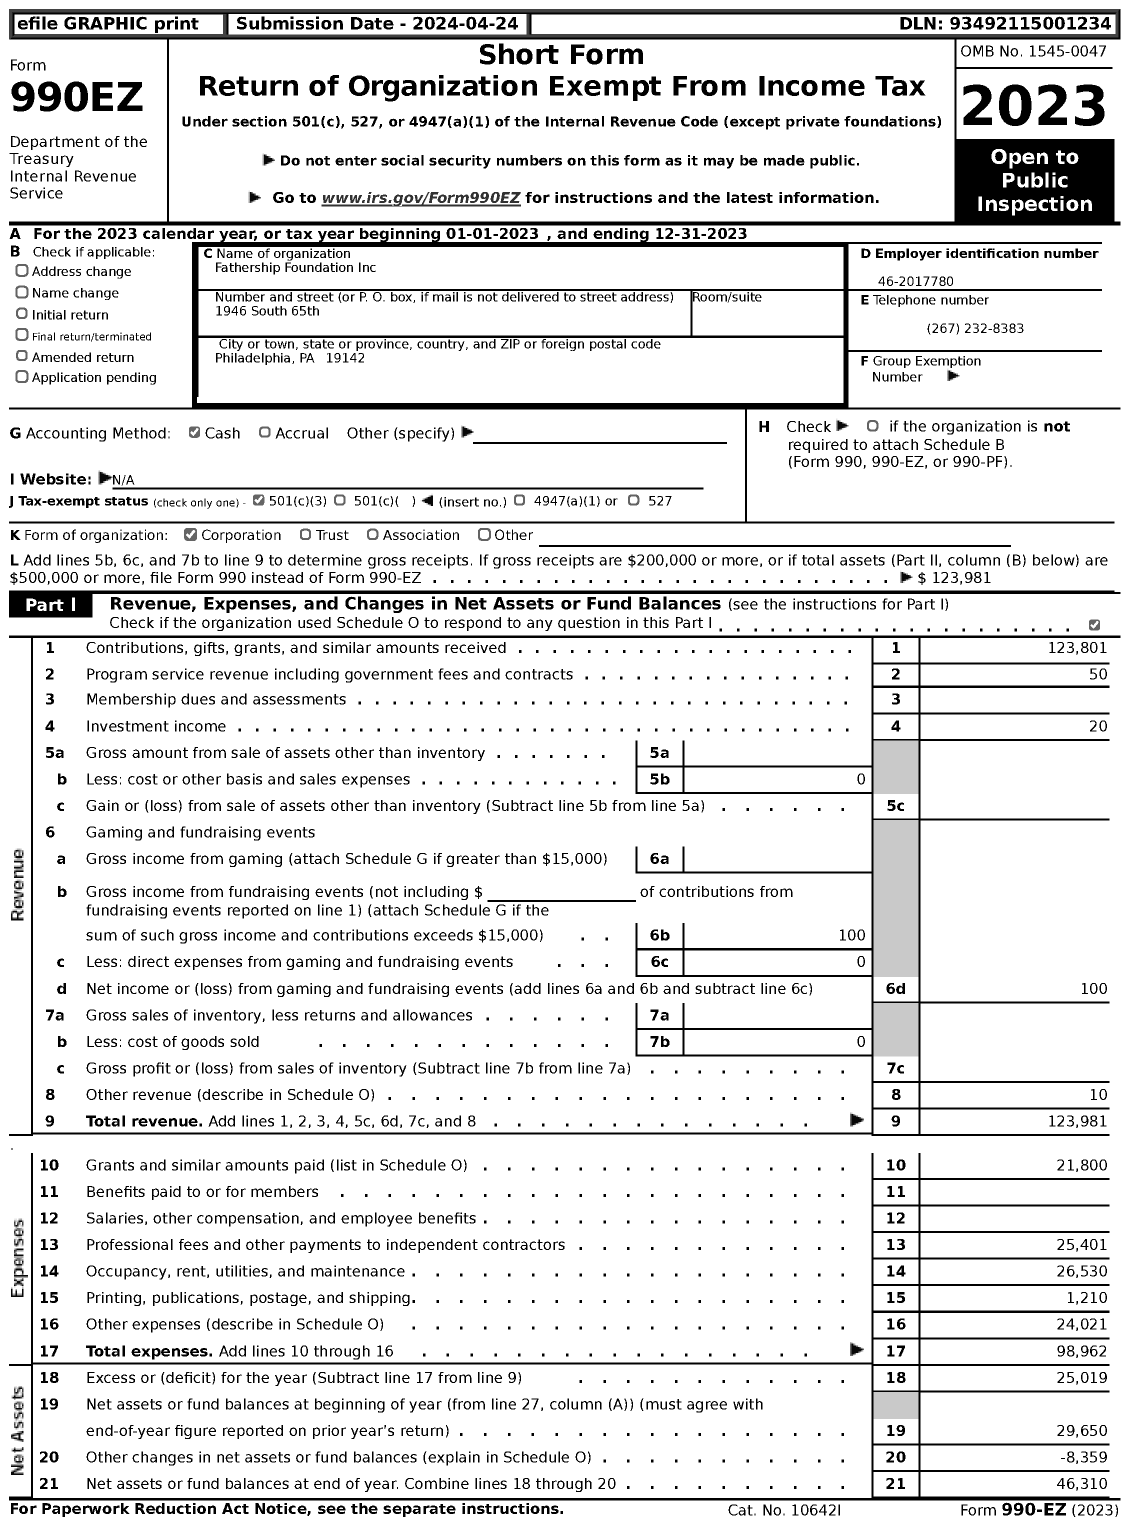 Image of first page of 2023 Form 990EZ for Fathership Foundation